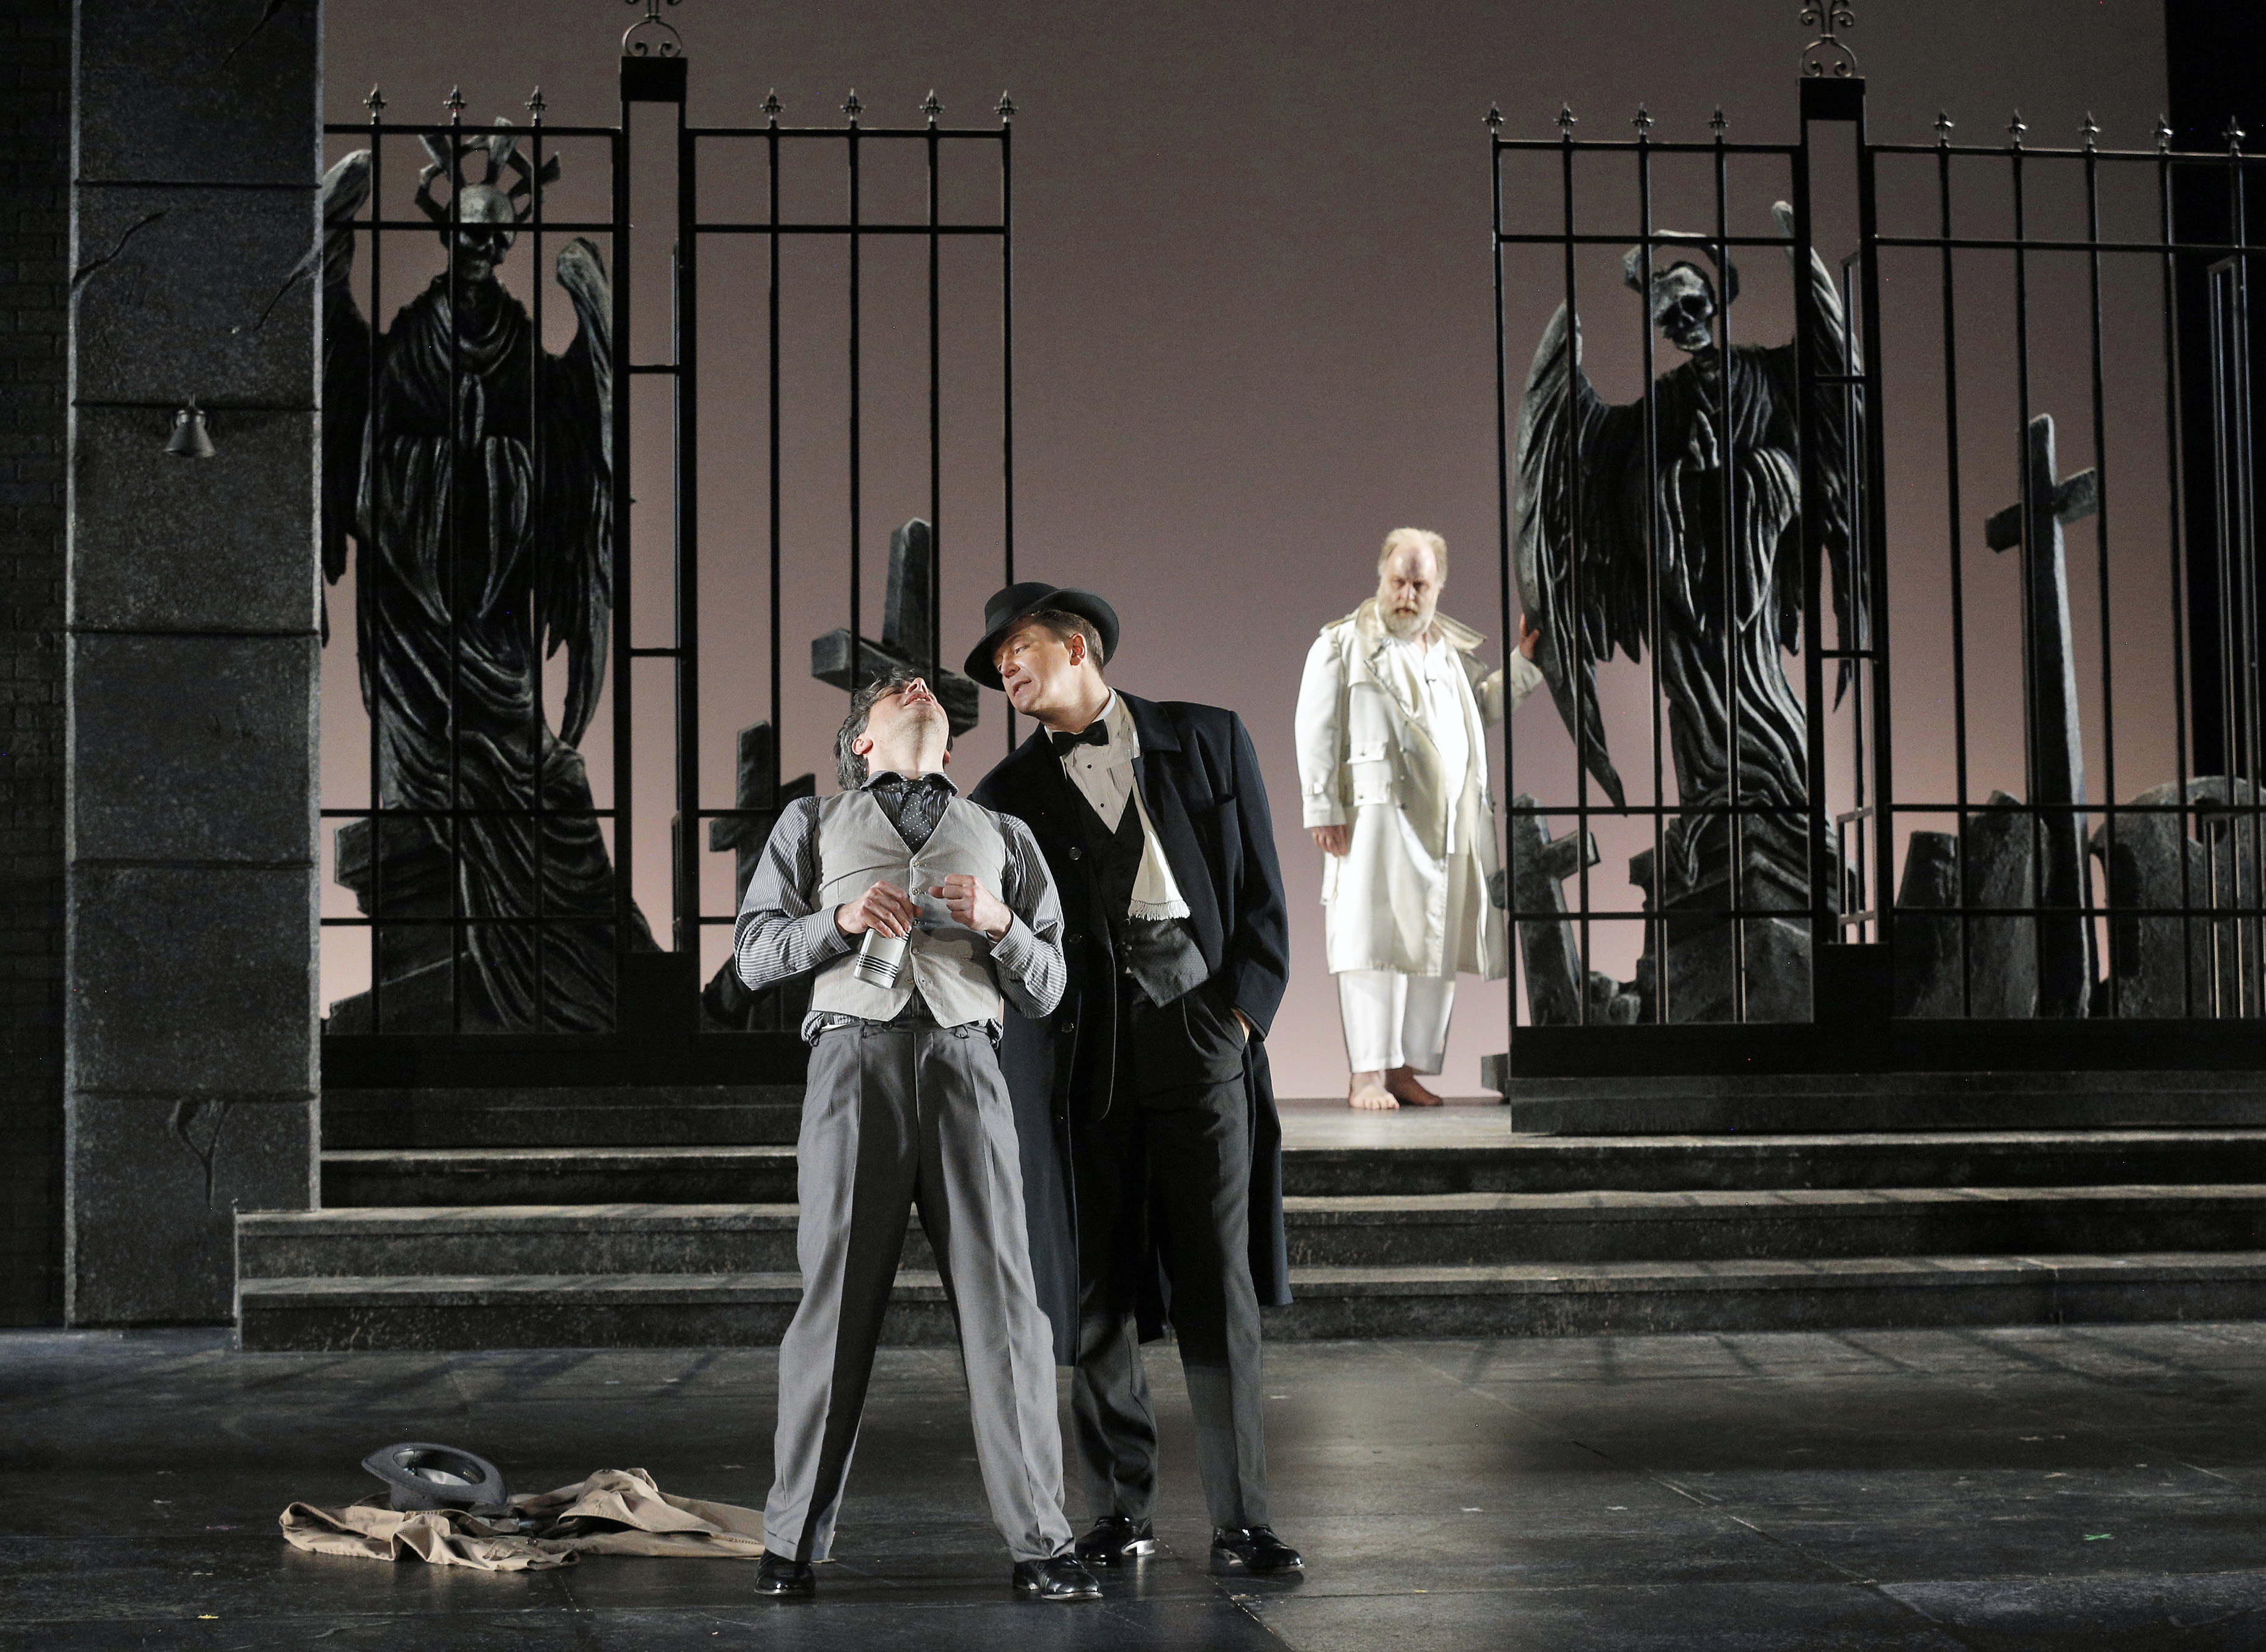 CAN’T FIGHT THIS FEELING: Lyric Opera ‘Giovanni’ exploits visual, emotional contrasts